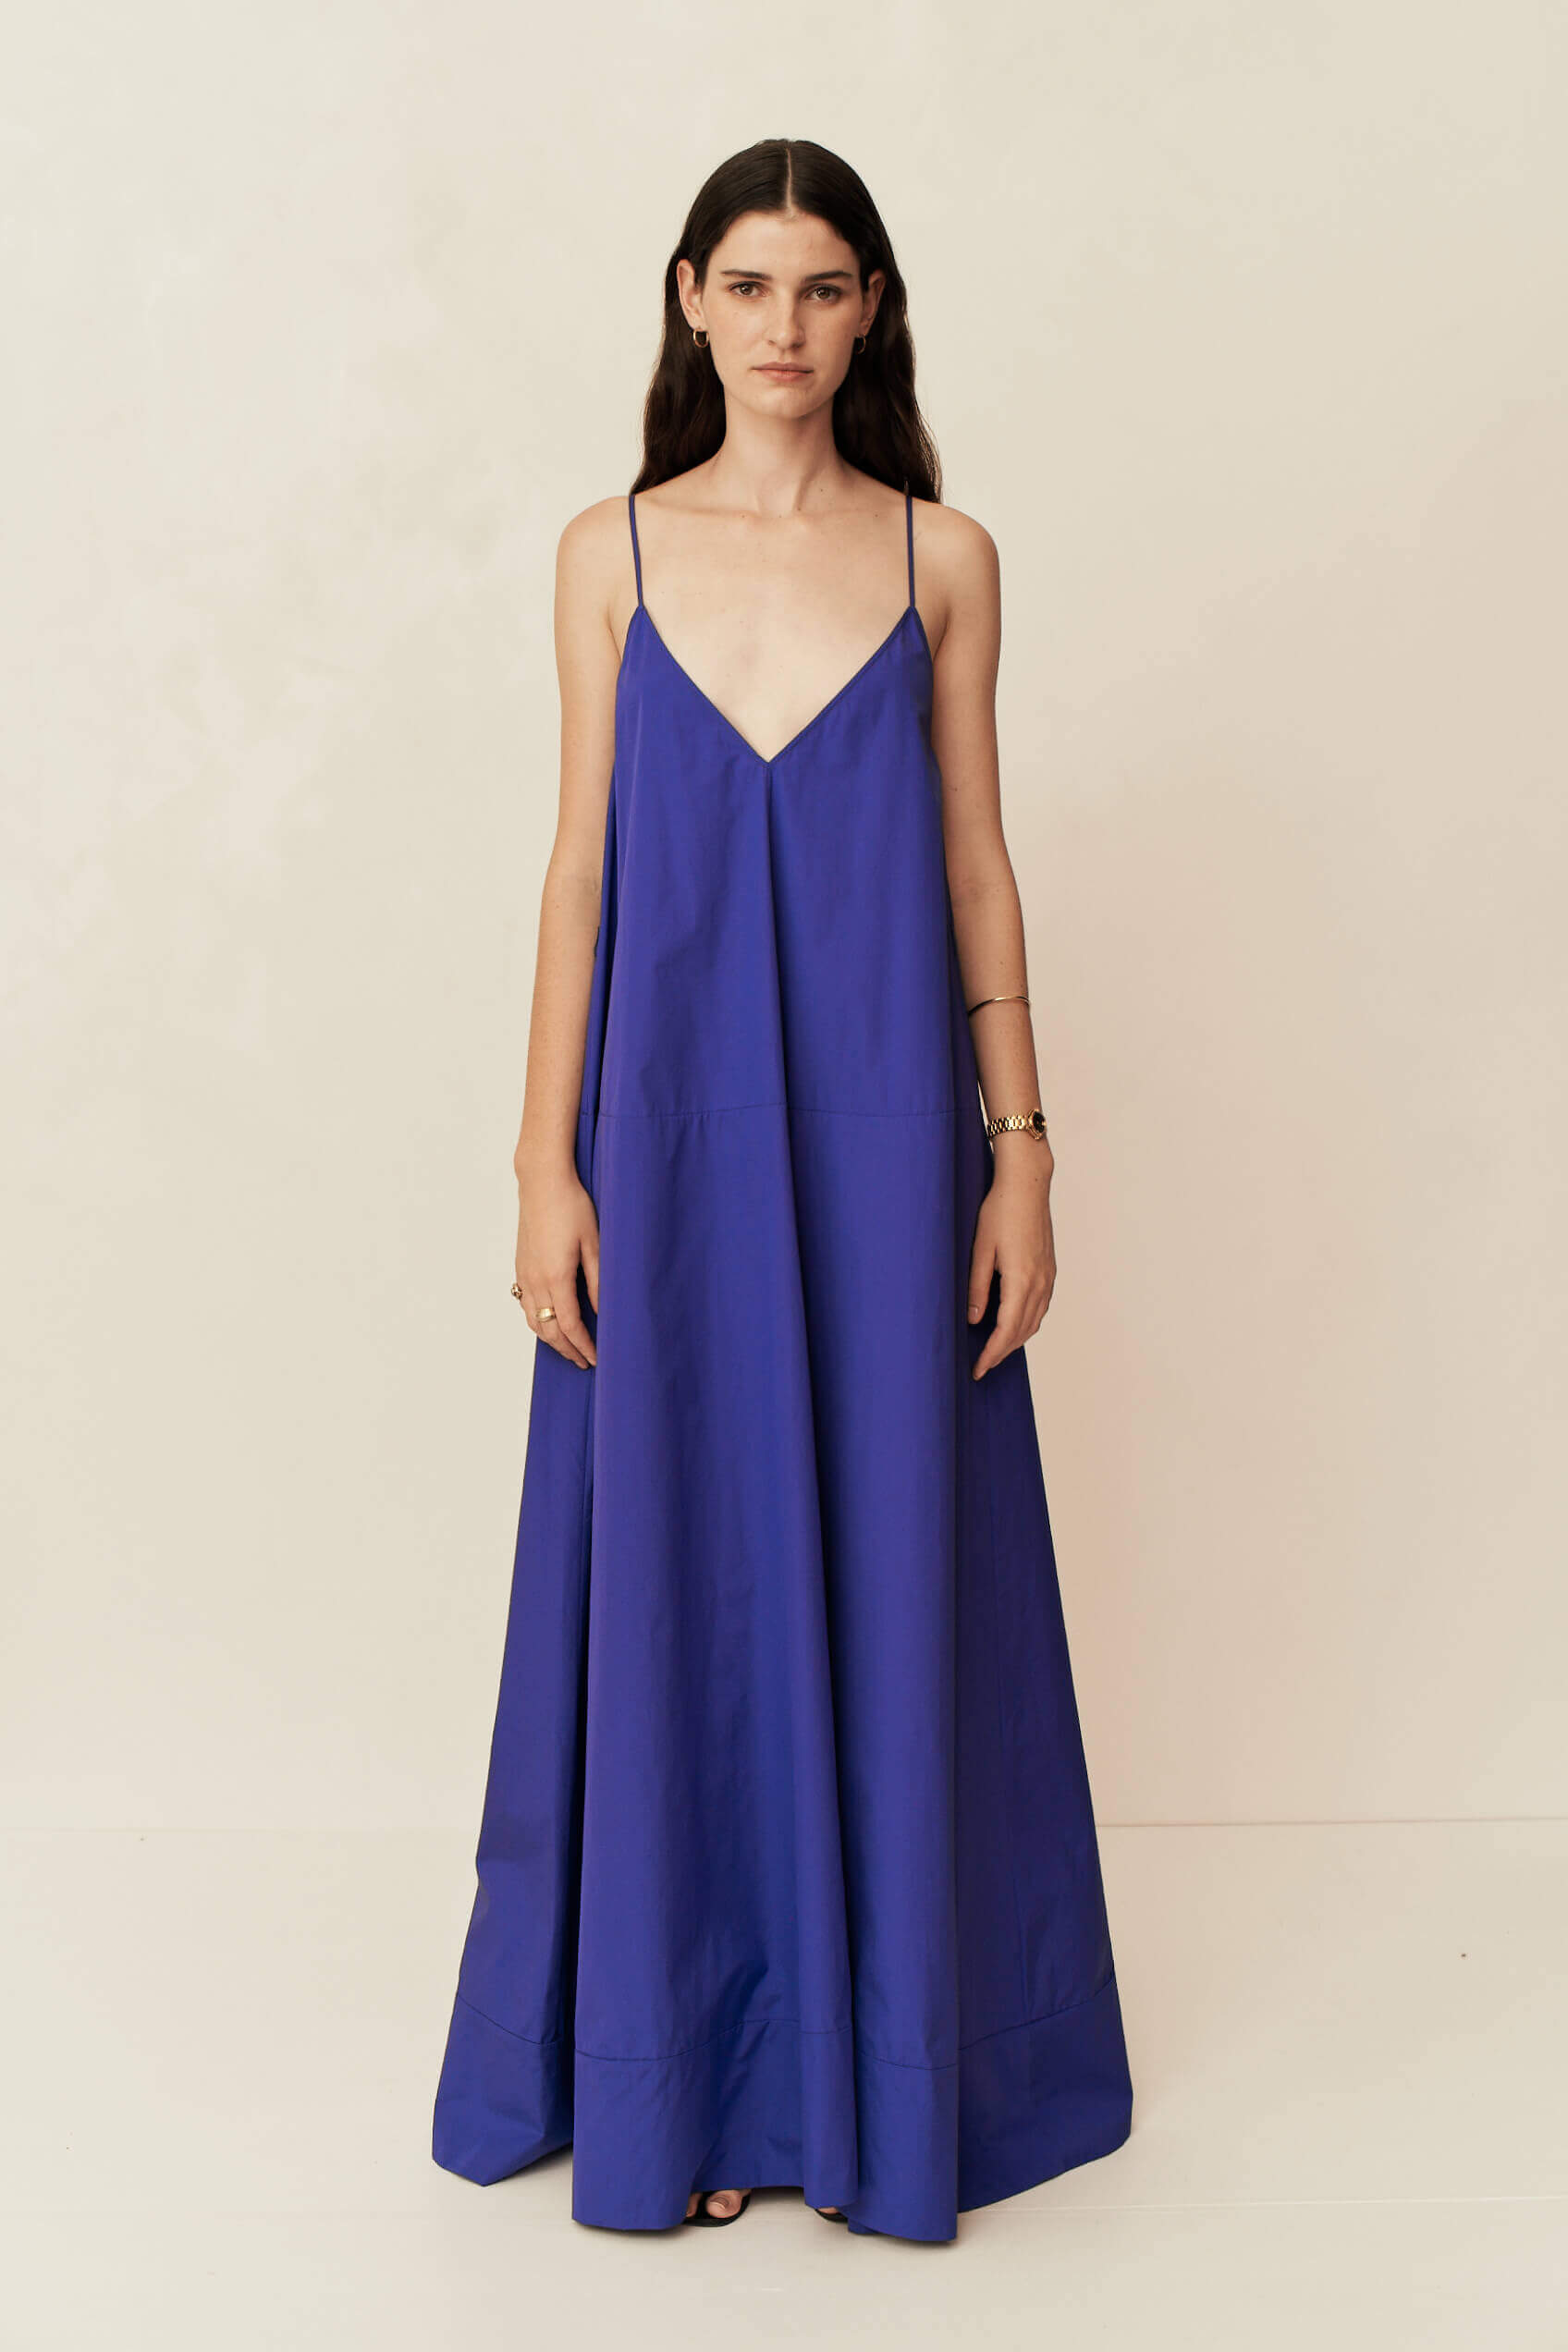 Esse Strap V Midi Dress in Cobalt from The New Trend